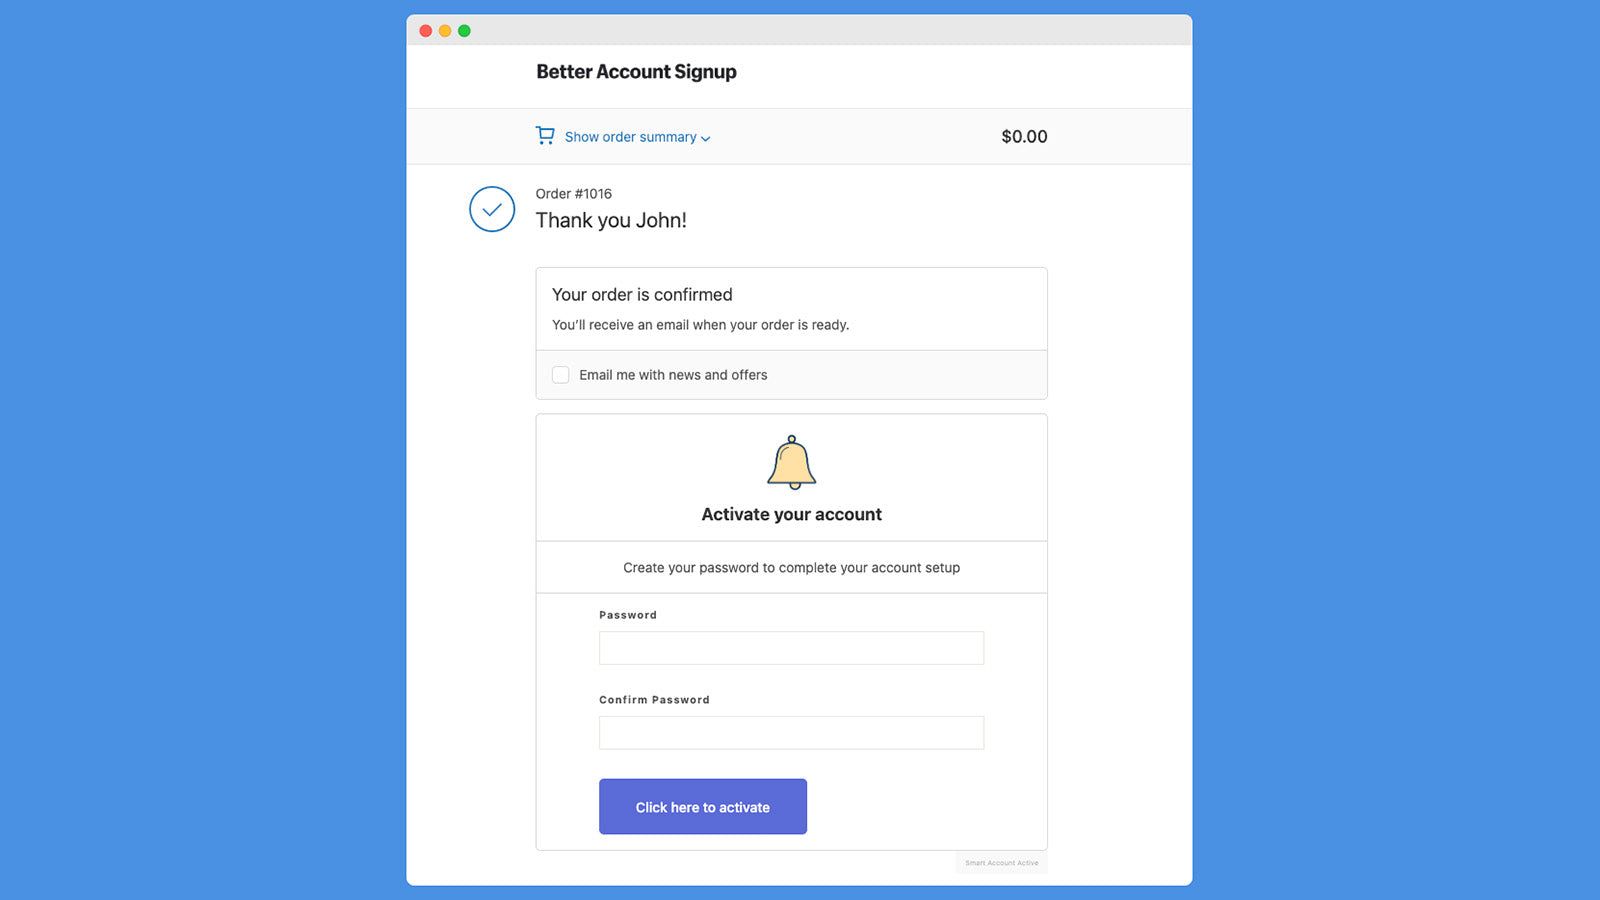 Post Purchase Account Signup